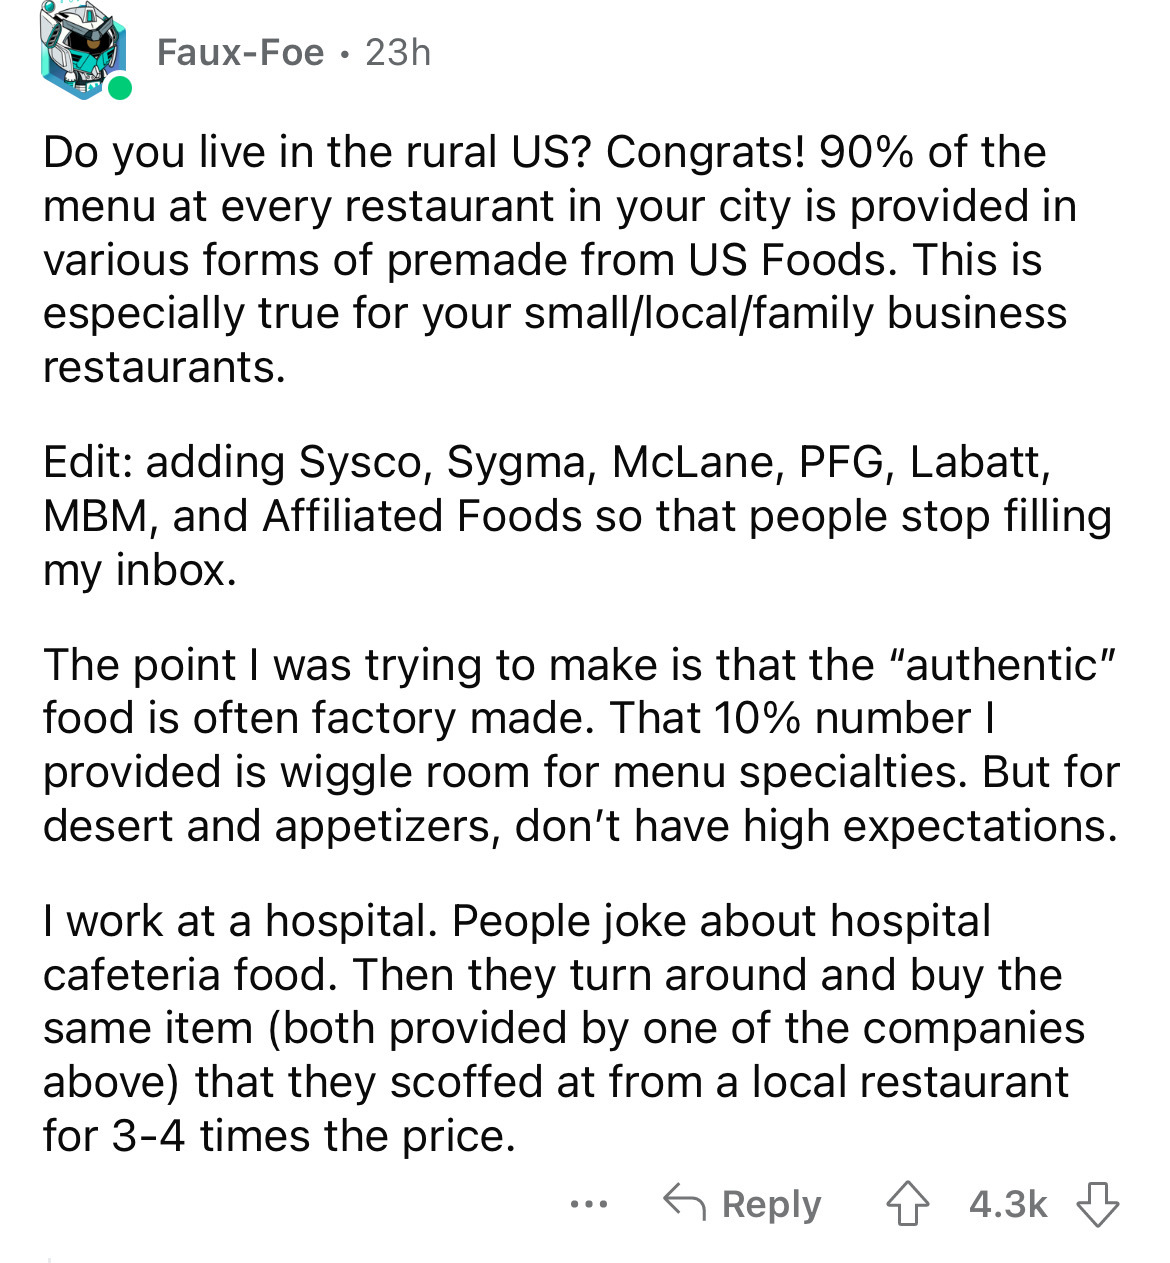 document - FauxFoe 23h Do you live in the rural Us? Congrats! 90% of the menu at every restaurant in your city is provided in various forms of premade from Us Foods. This is especially true for your smalllocalfamily business restaurants. Edit adding Sysco